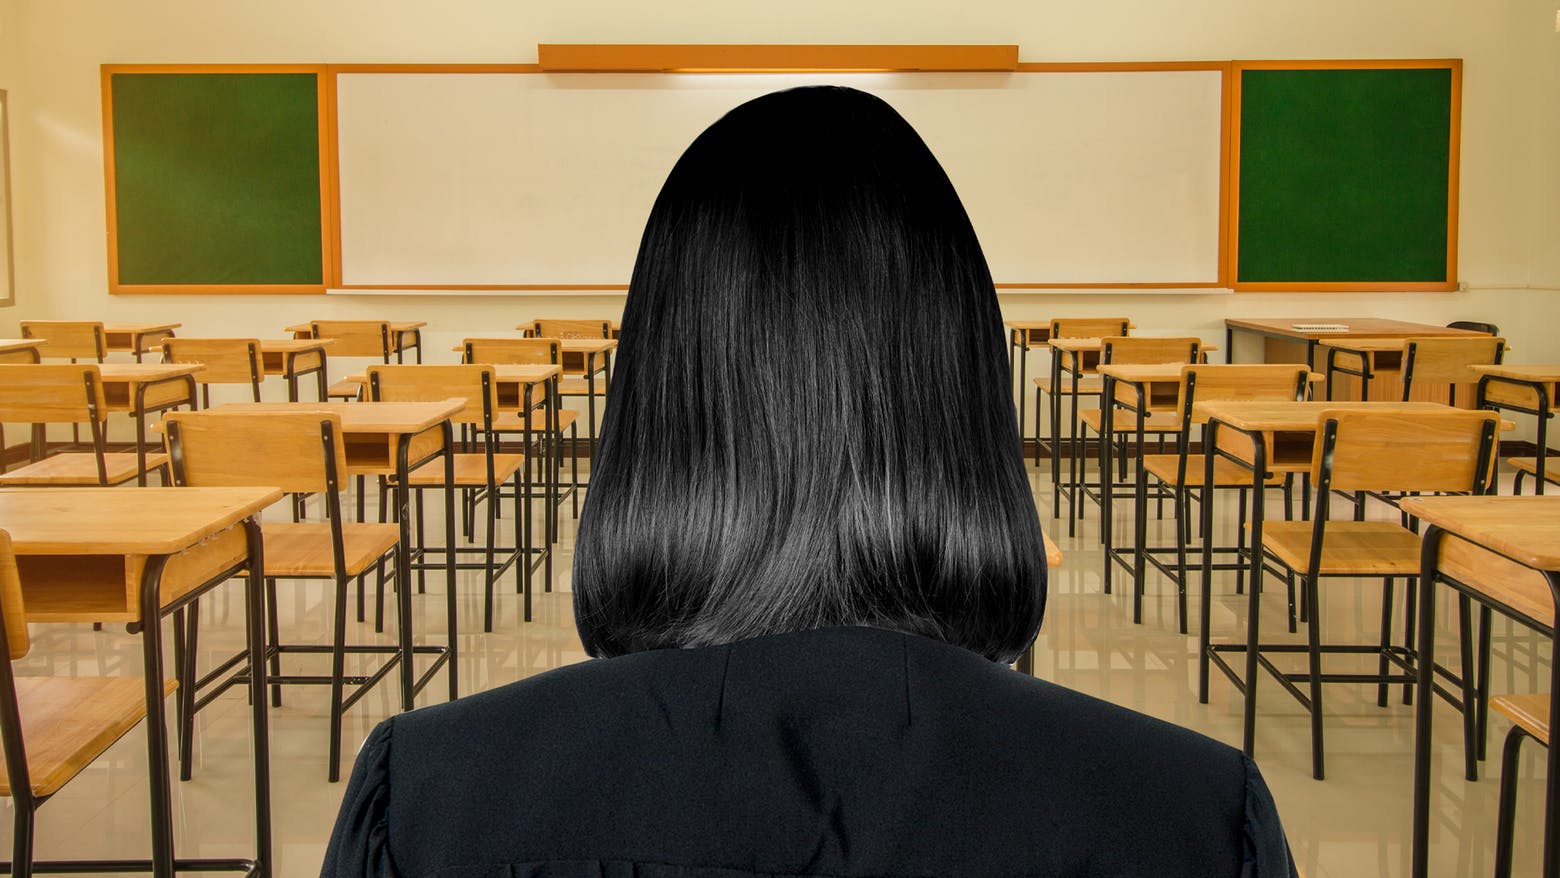 A mysterious figure in a classroom